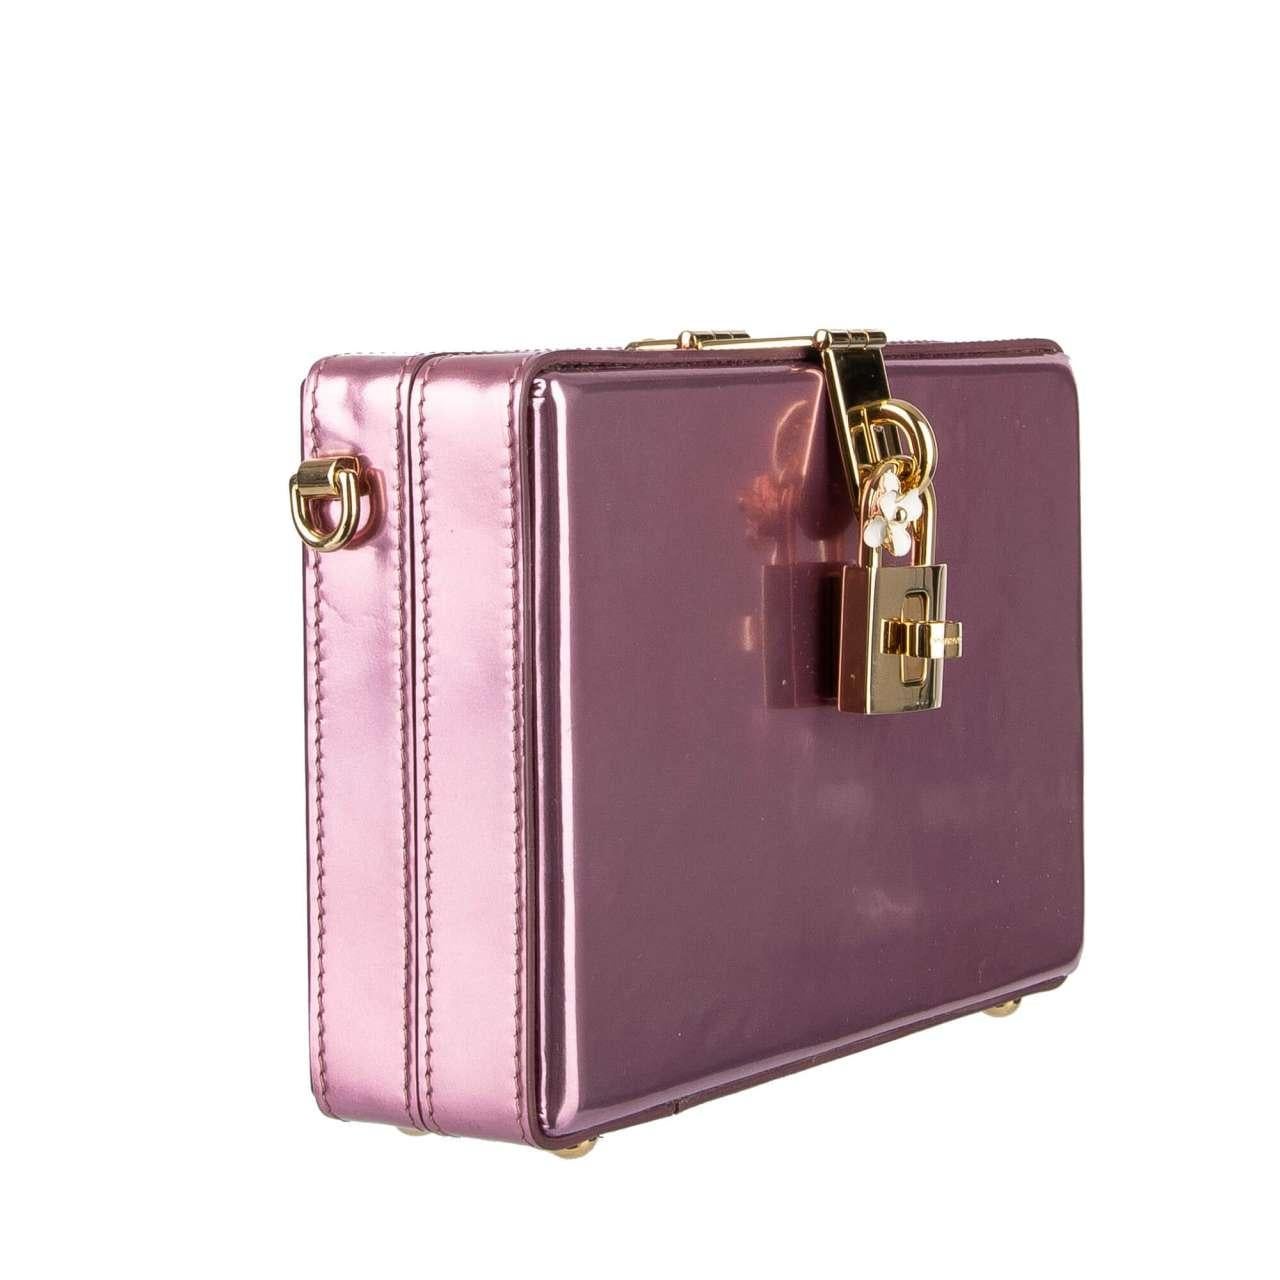 Dolce & Gabbana - Laminated Metallic Leather Bag DOLCE BOX Rose Pink In Excellent Condition For Sale In Erkrath, DE